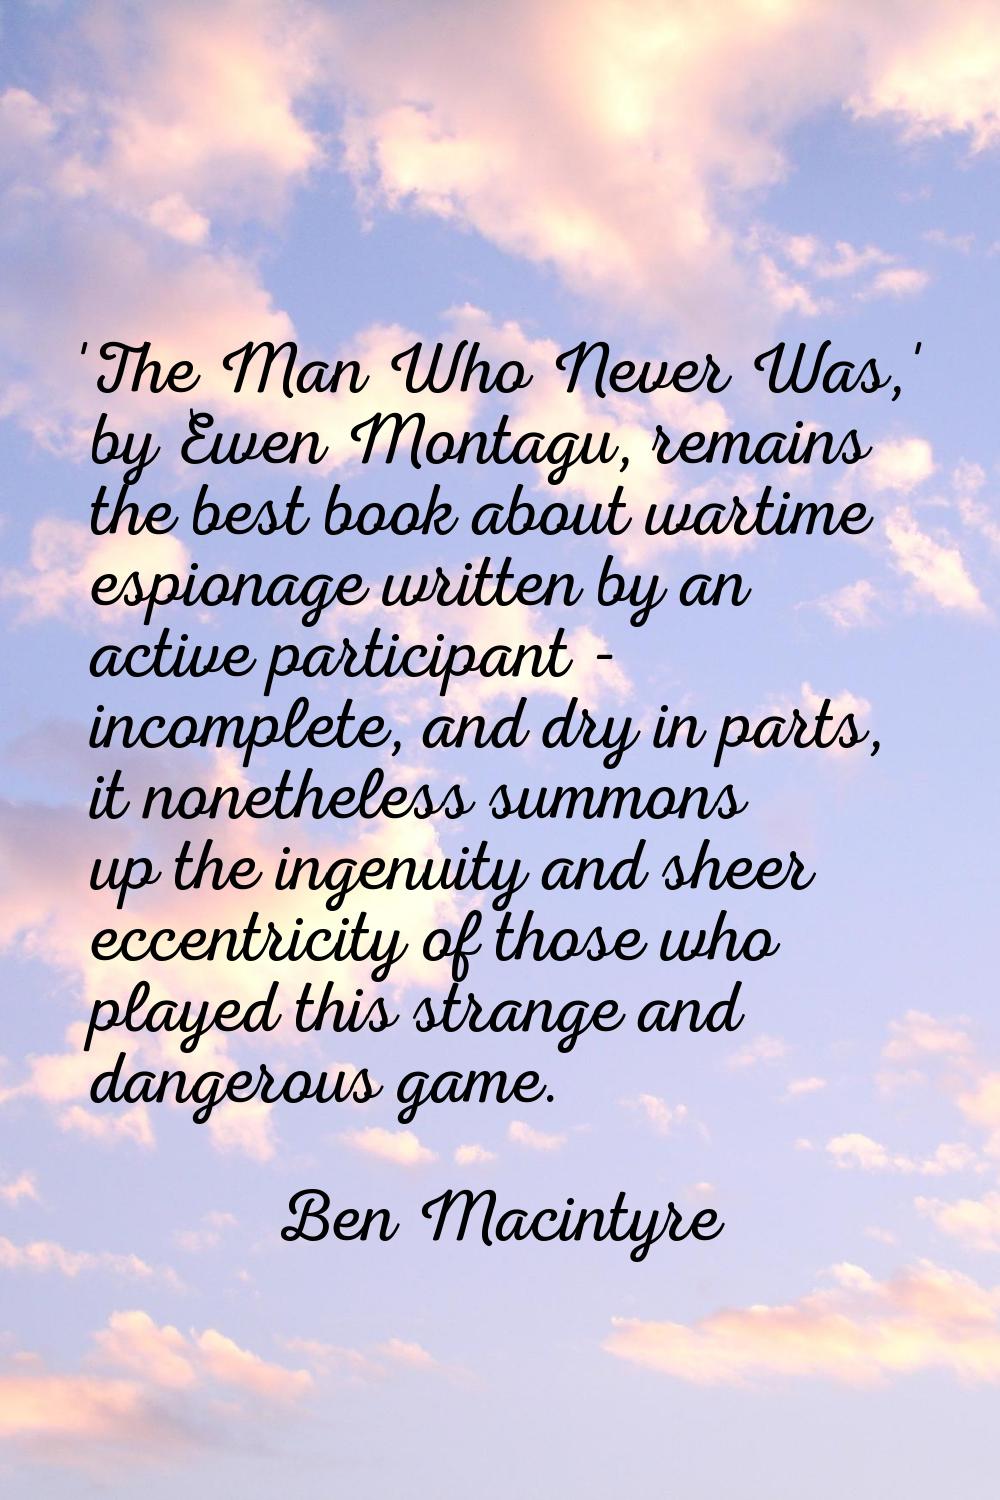 'The Man Who Never Was,' by Ewen Montagu, remains the best book about wartime espionage written by 